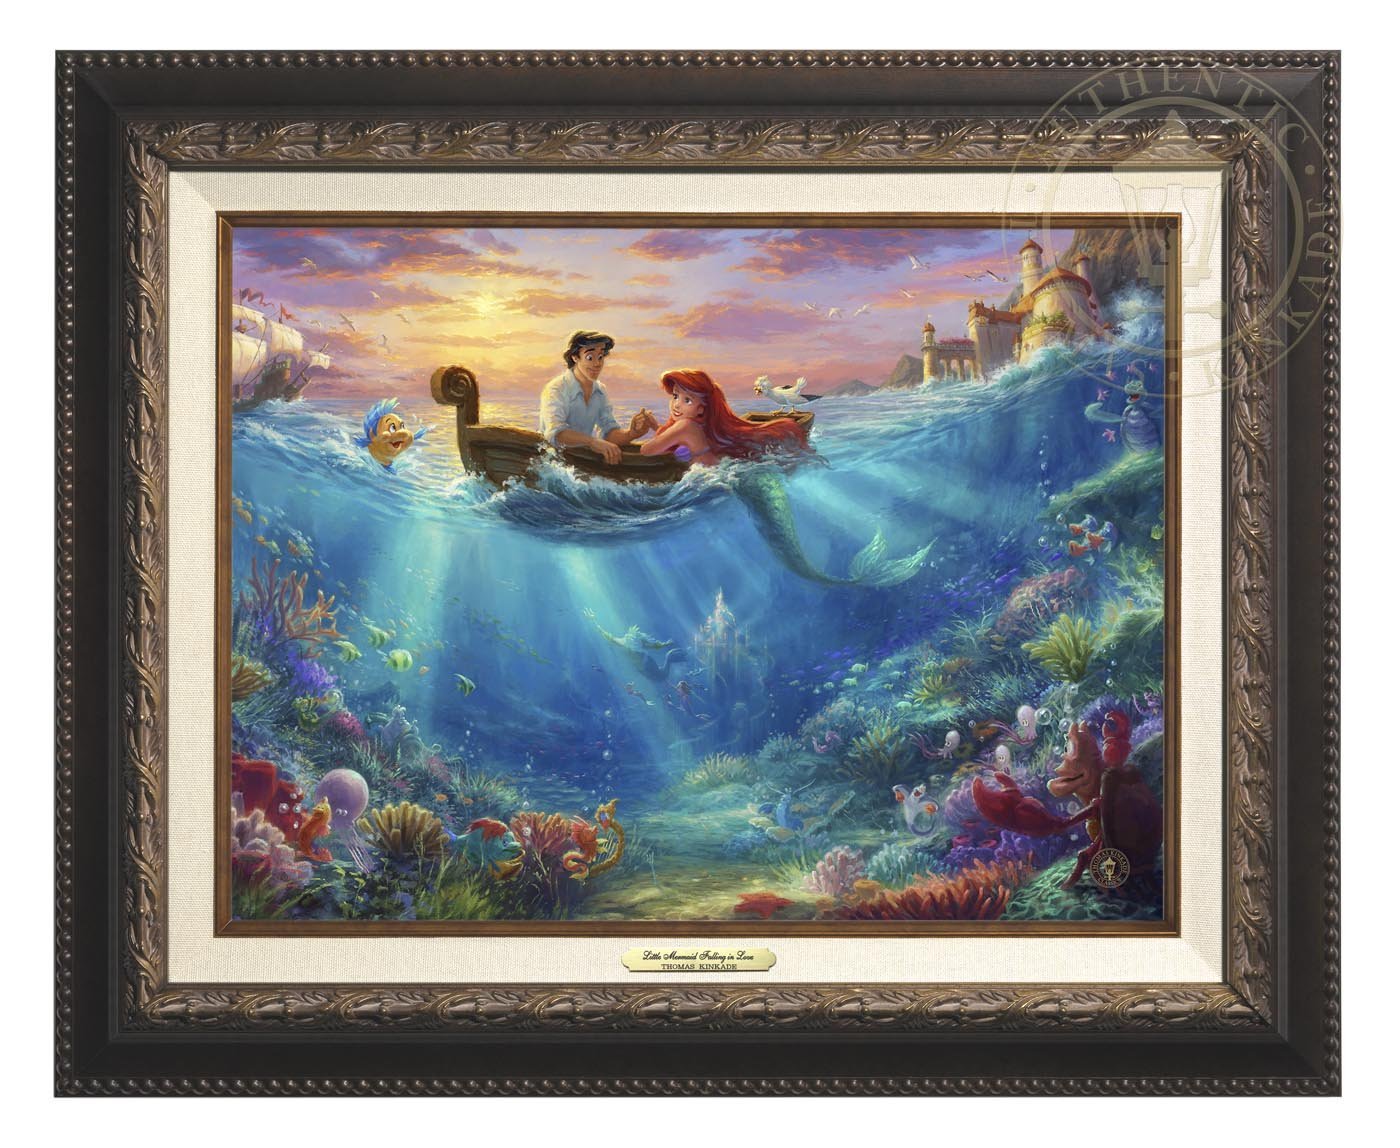 Little Mermaid Falling in Love by Thomas Kinkade Studios.  Ariel and Prince Eric share precious time together with Flounder and Sebastian nearby. The wretched sea witch, Ursula, lurks in the shadows for her opportunity to strike. Deep below King Triton races from the castle in Atlantica to rescue his daughter - Aged Bronze Frame